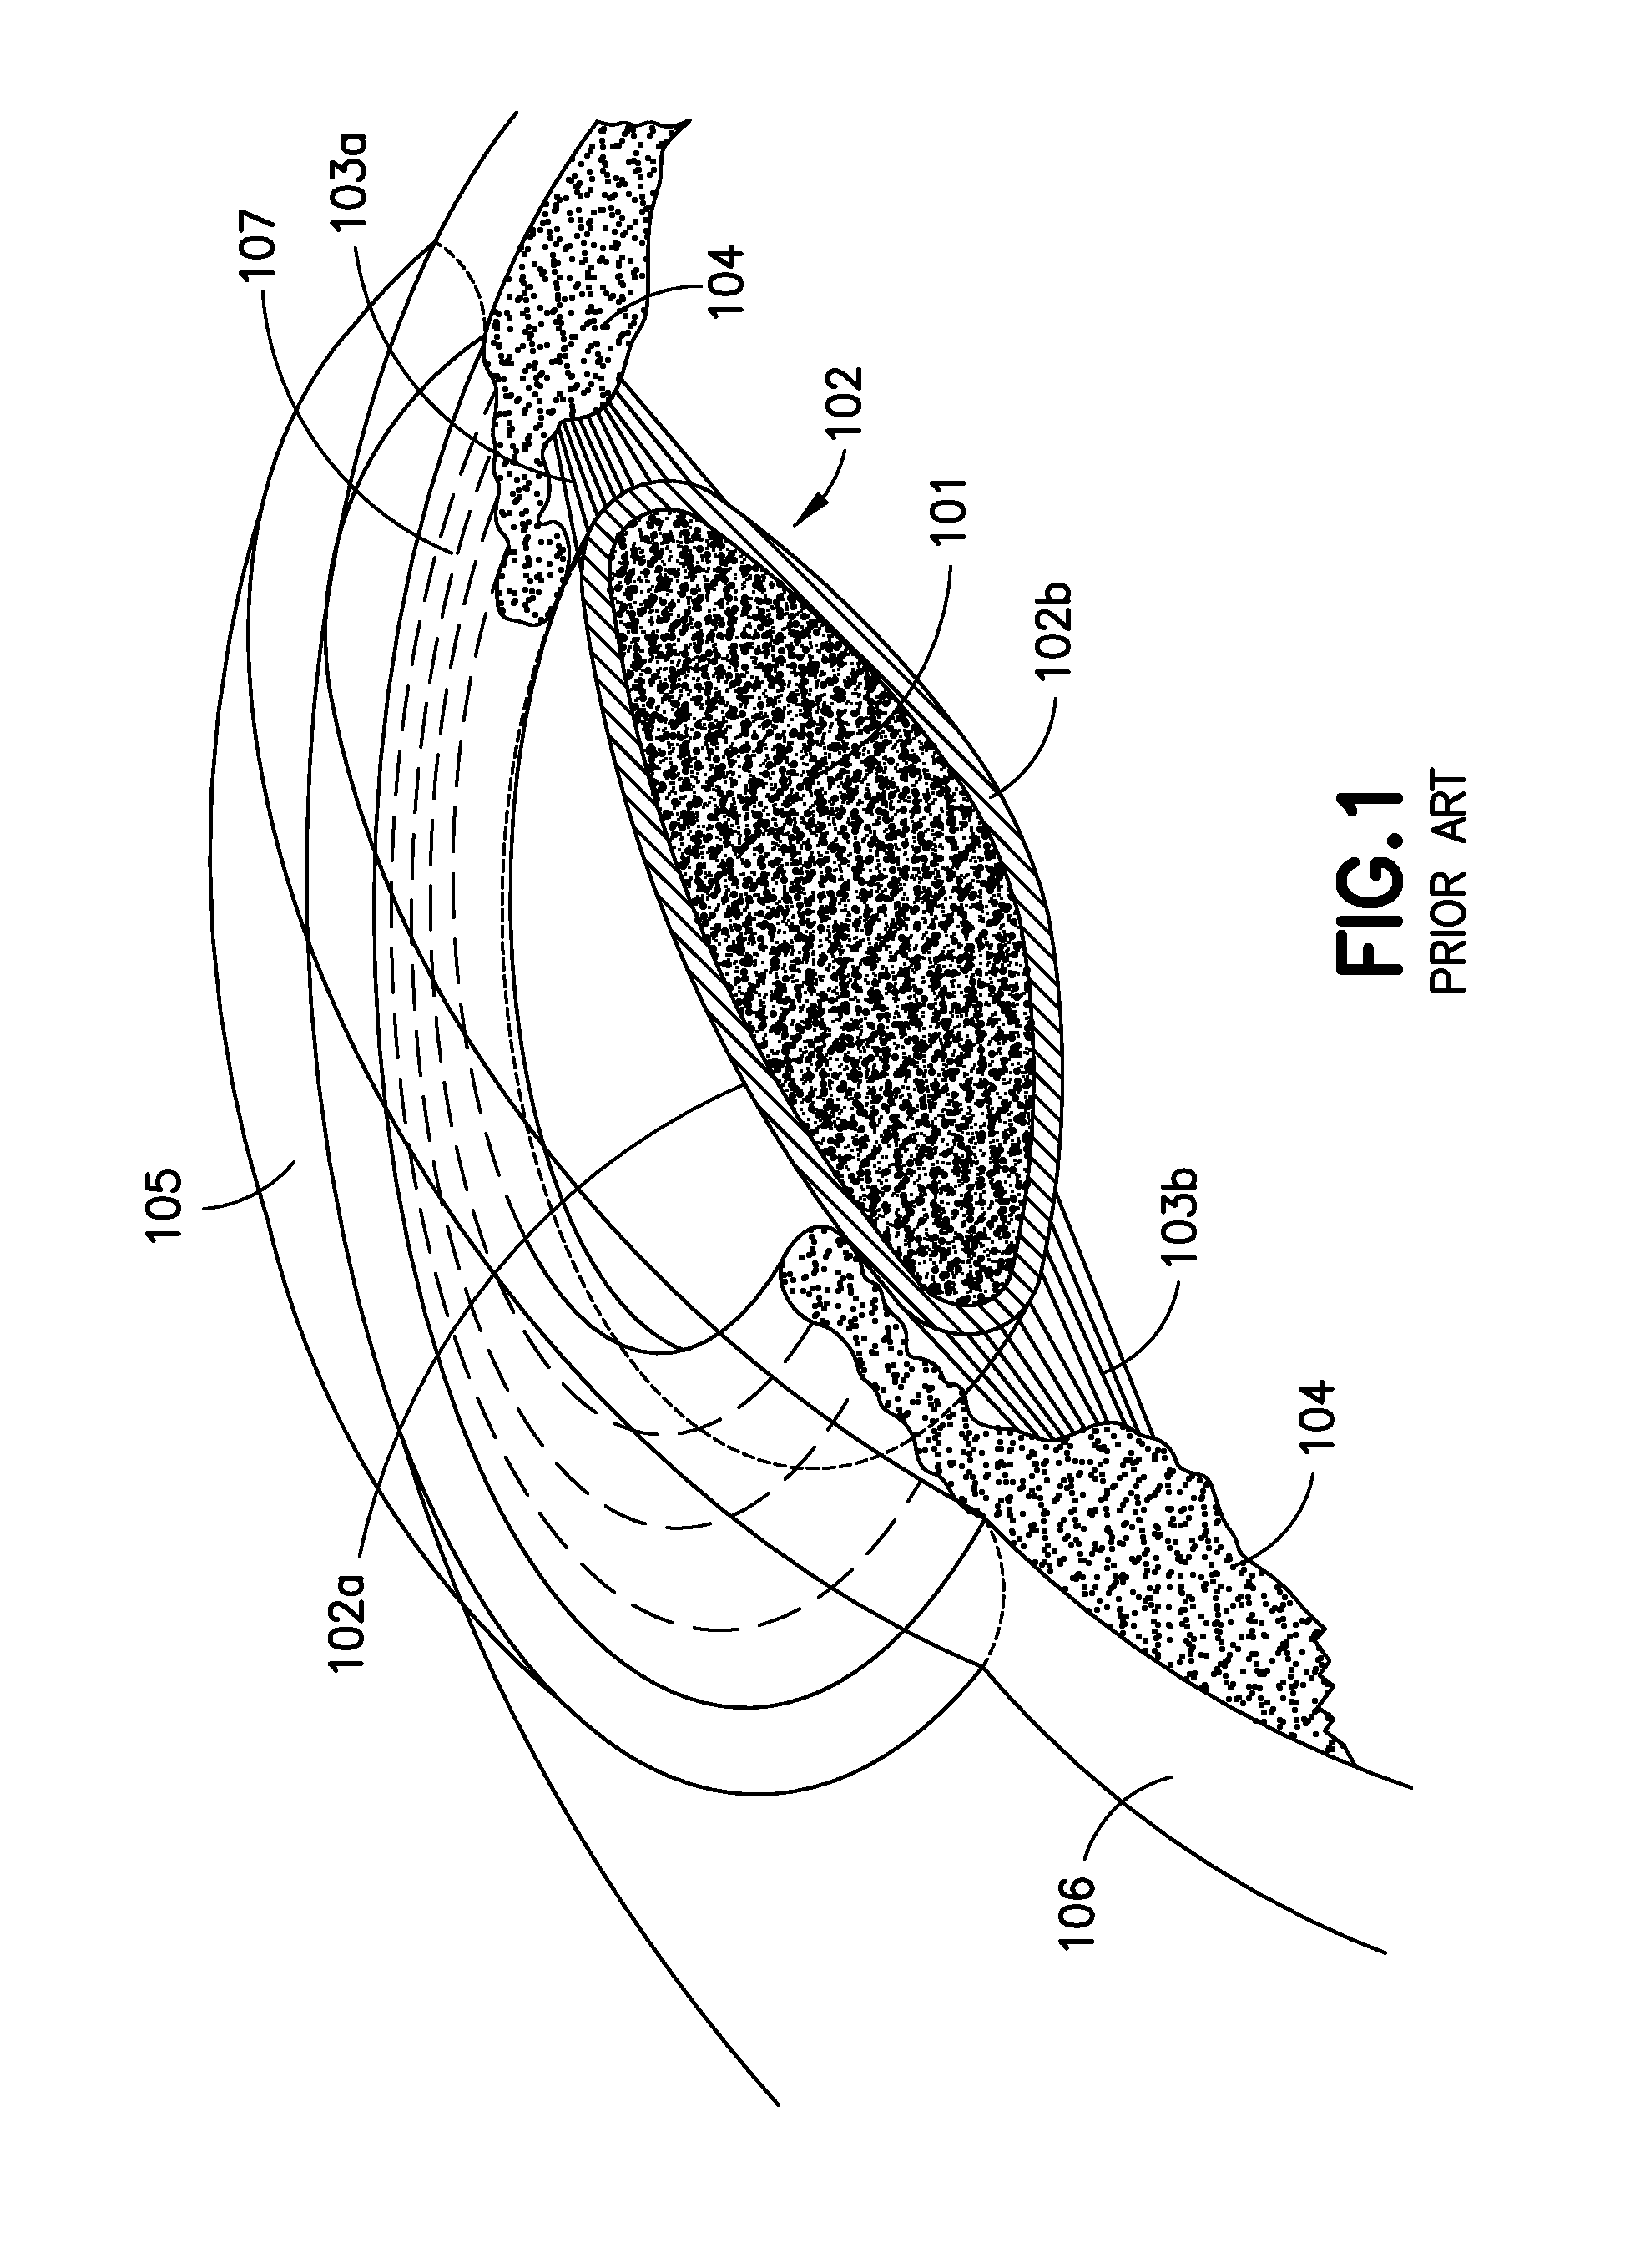 Tensioning rings for anterior capsules and accommodative intraocular lenses for use therewith